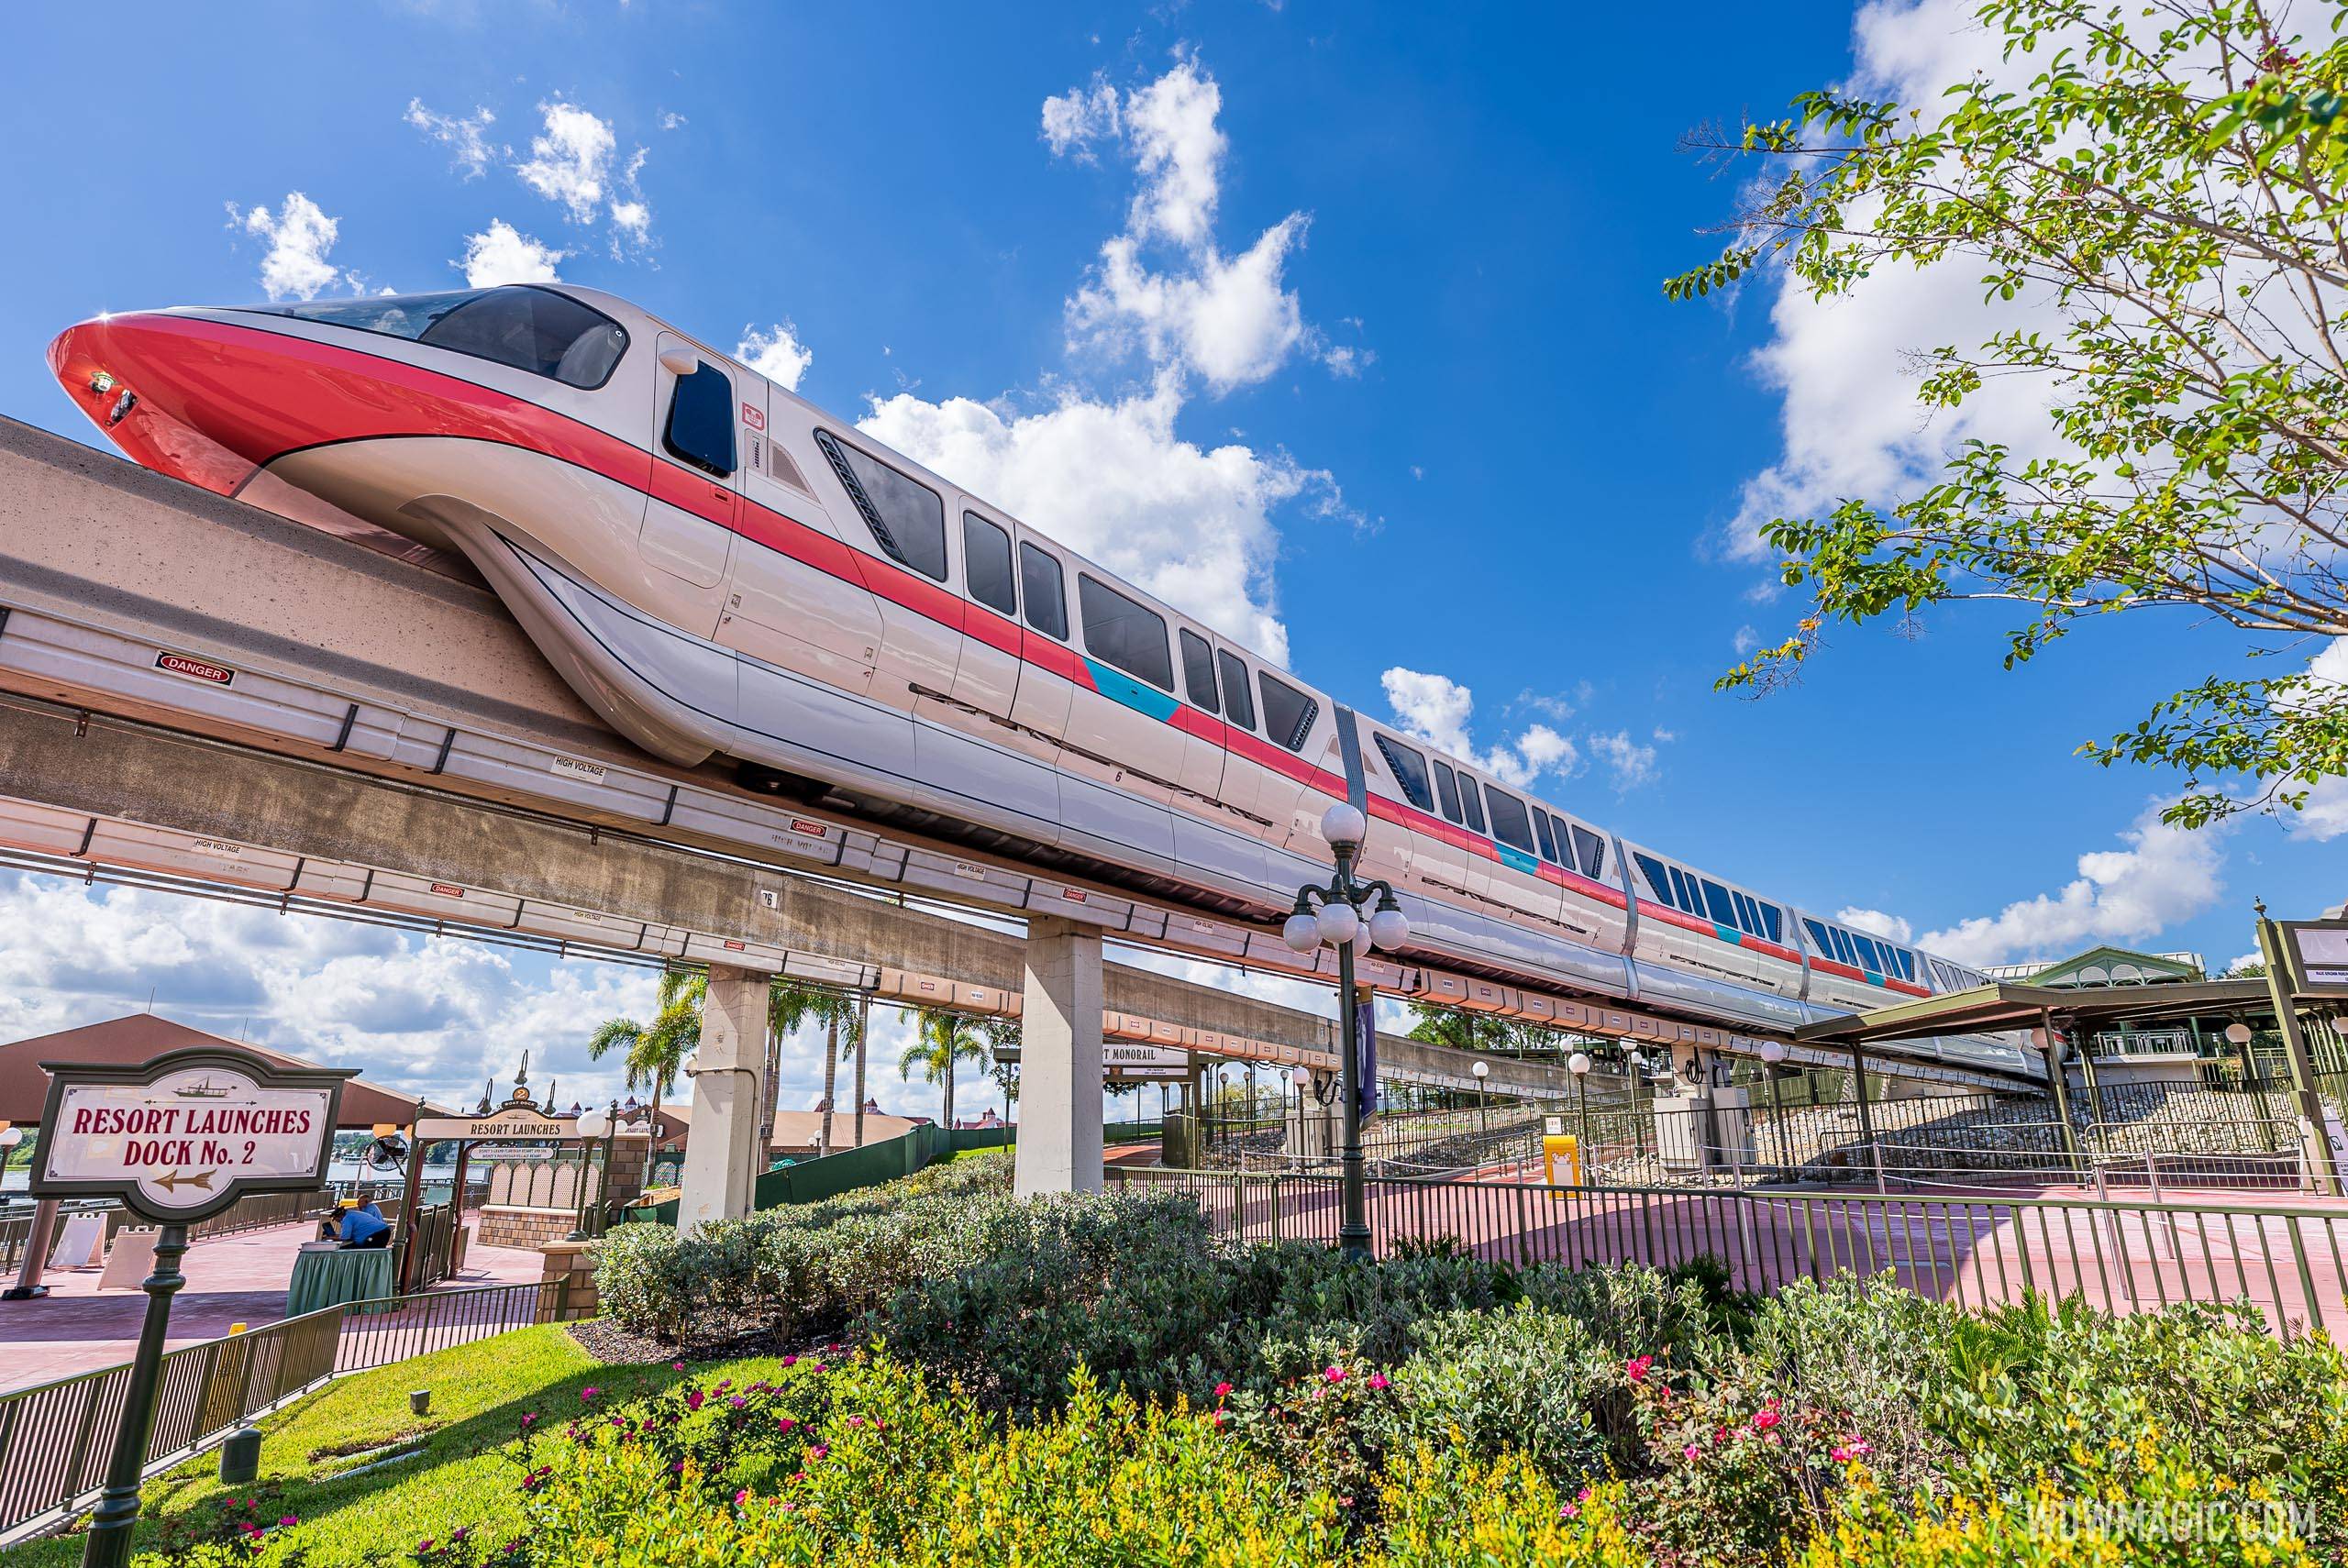 A look at the refurbished Monorail Coral on the Walt Disney World Monorail System